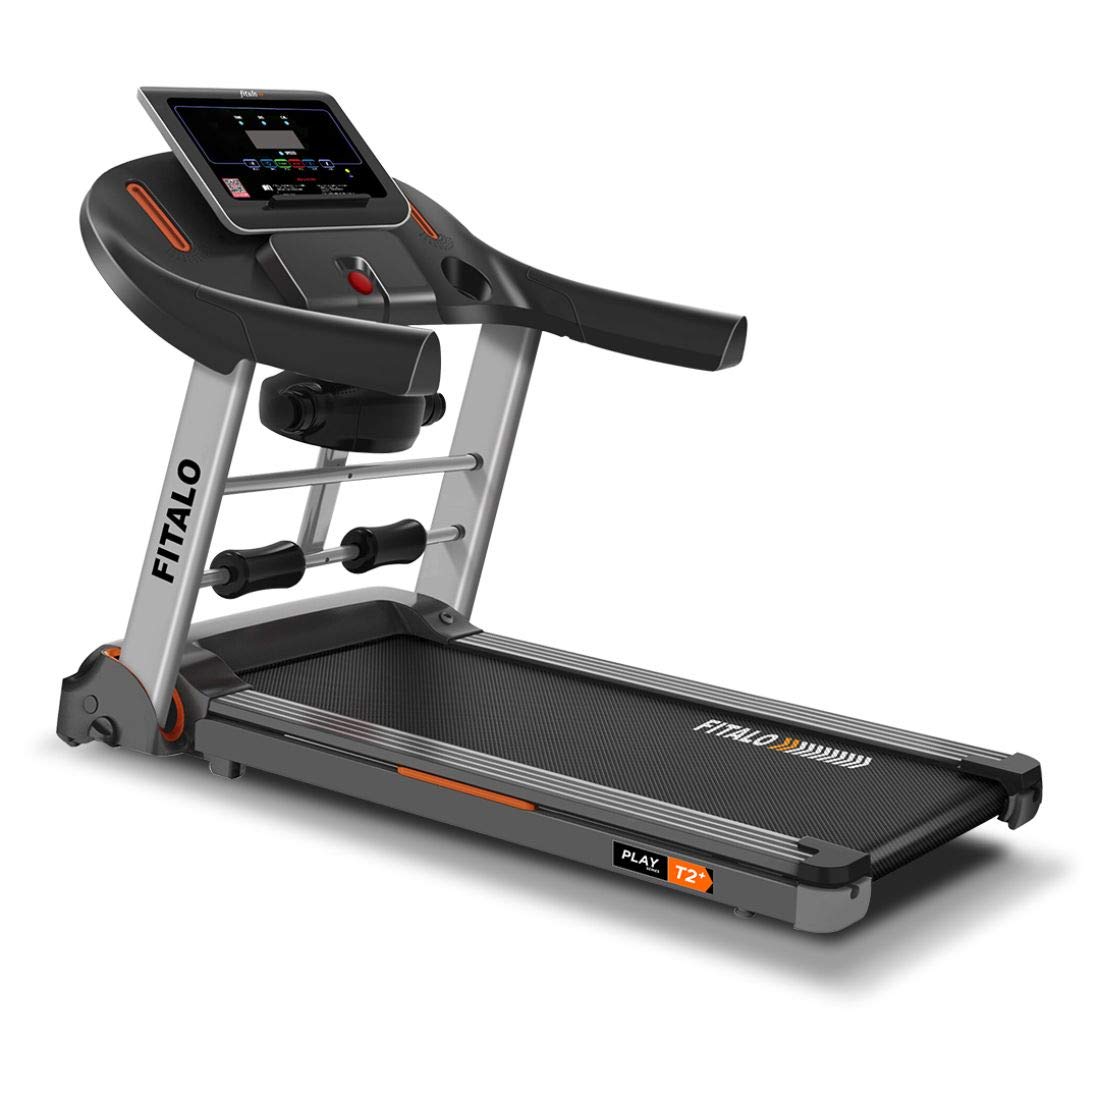 Fitalo PlayT2 Plus Treadmill is one of the best budget motorised treadmills in India